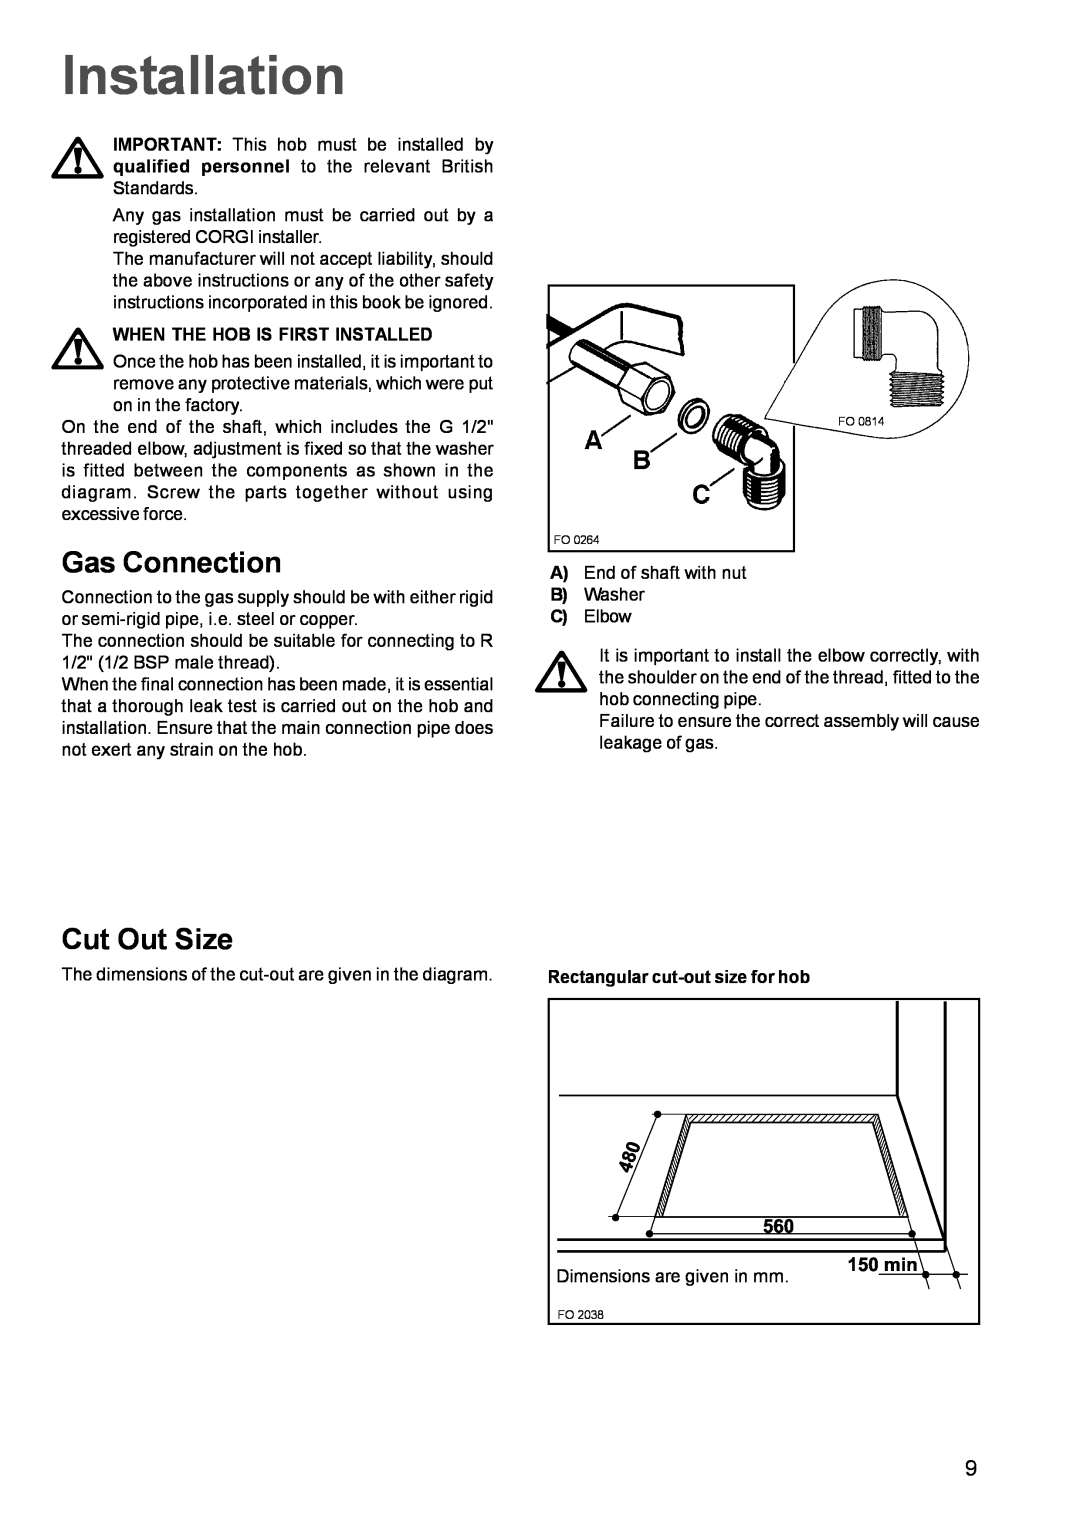 Zanussi ZGF782C manual Installation, Gas Connection, Cut Out Size, 150 min 